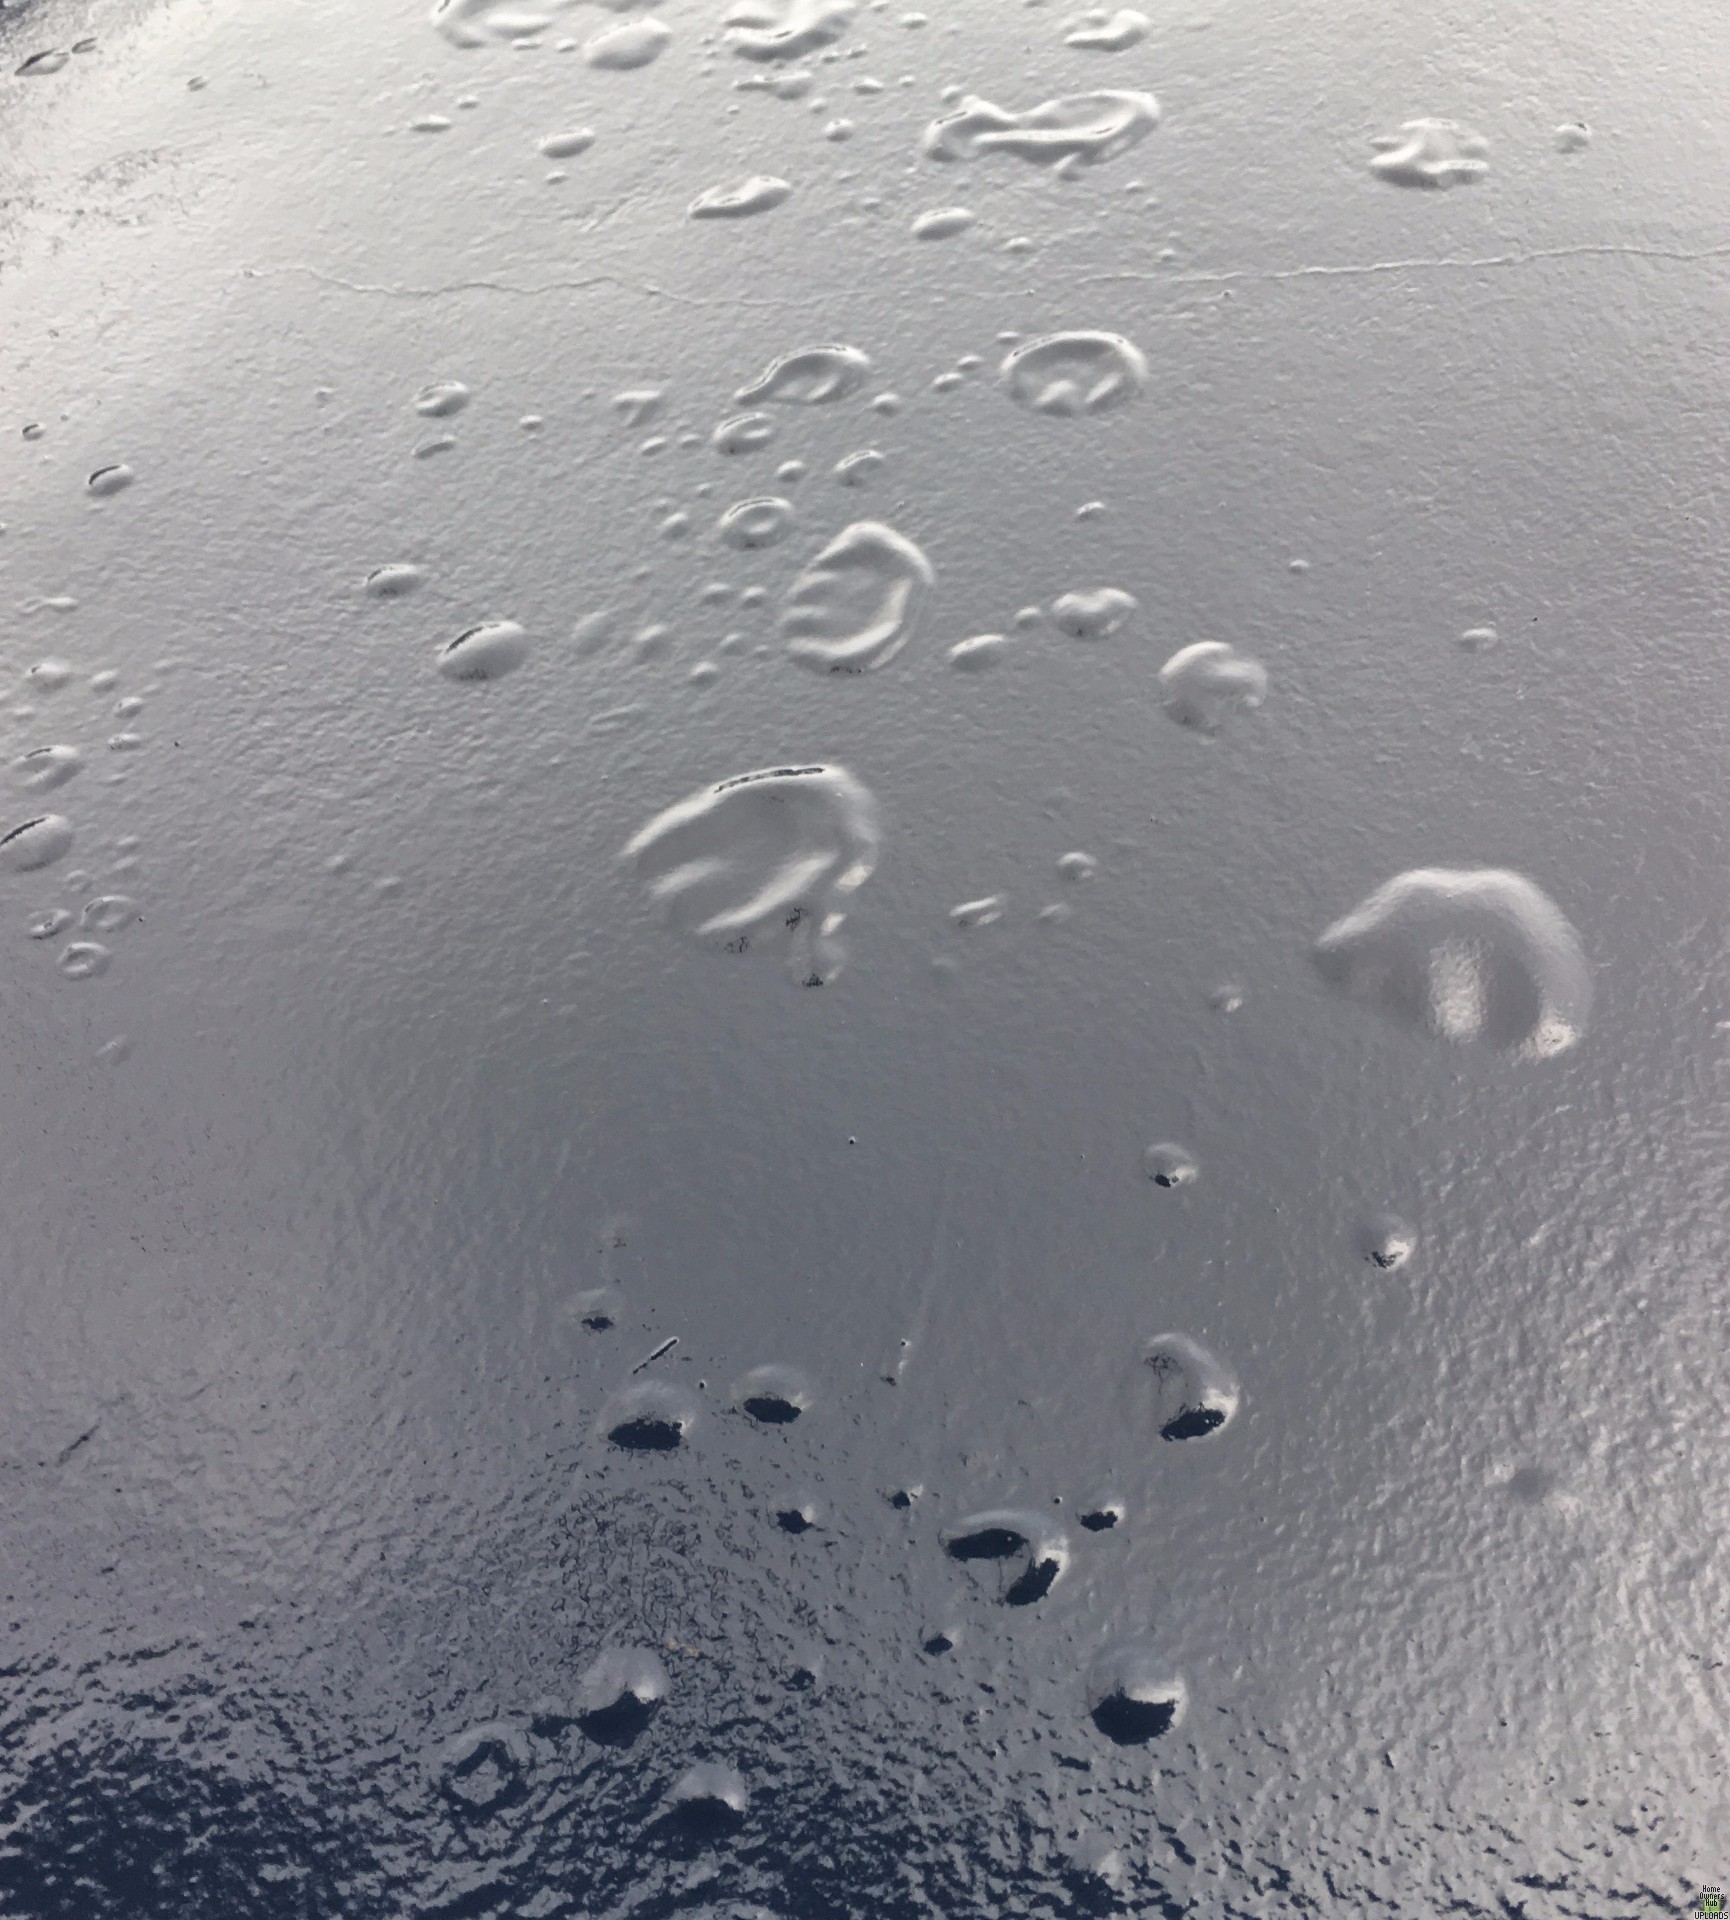 Image for bubble on stucco wall after raining